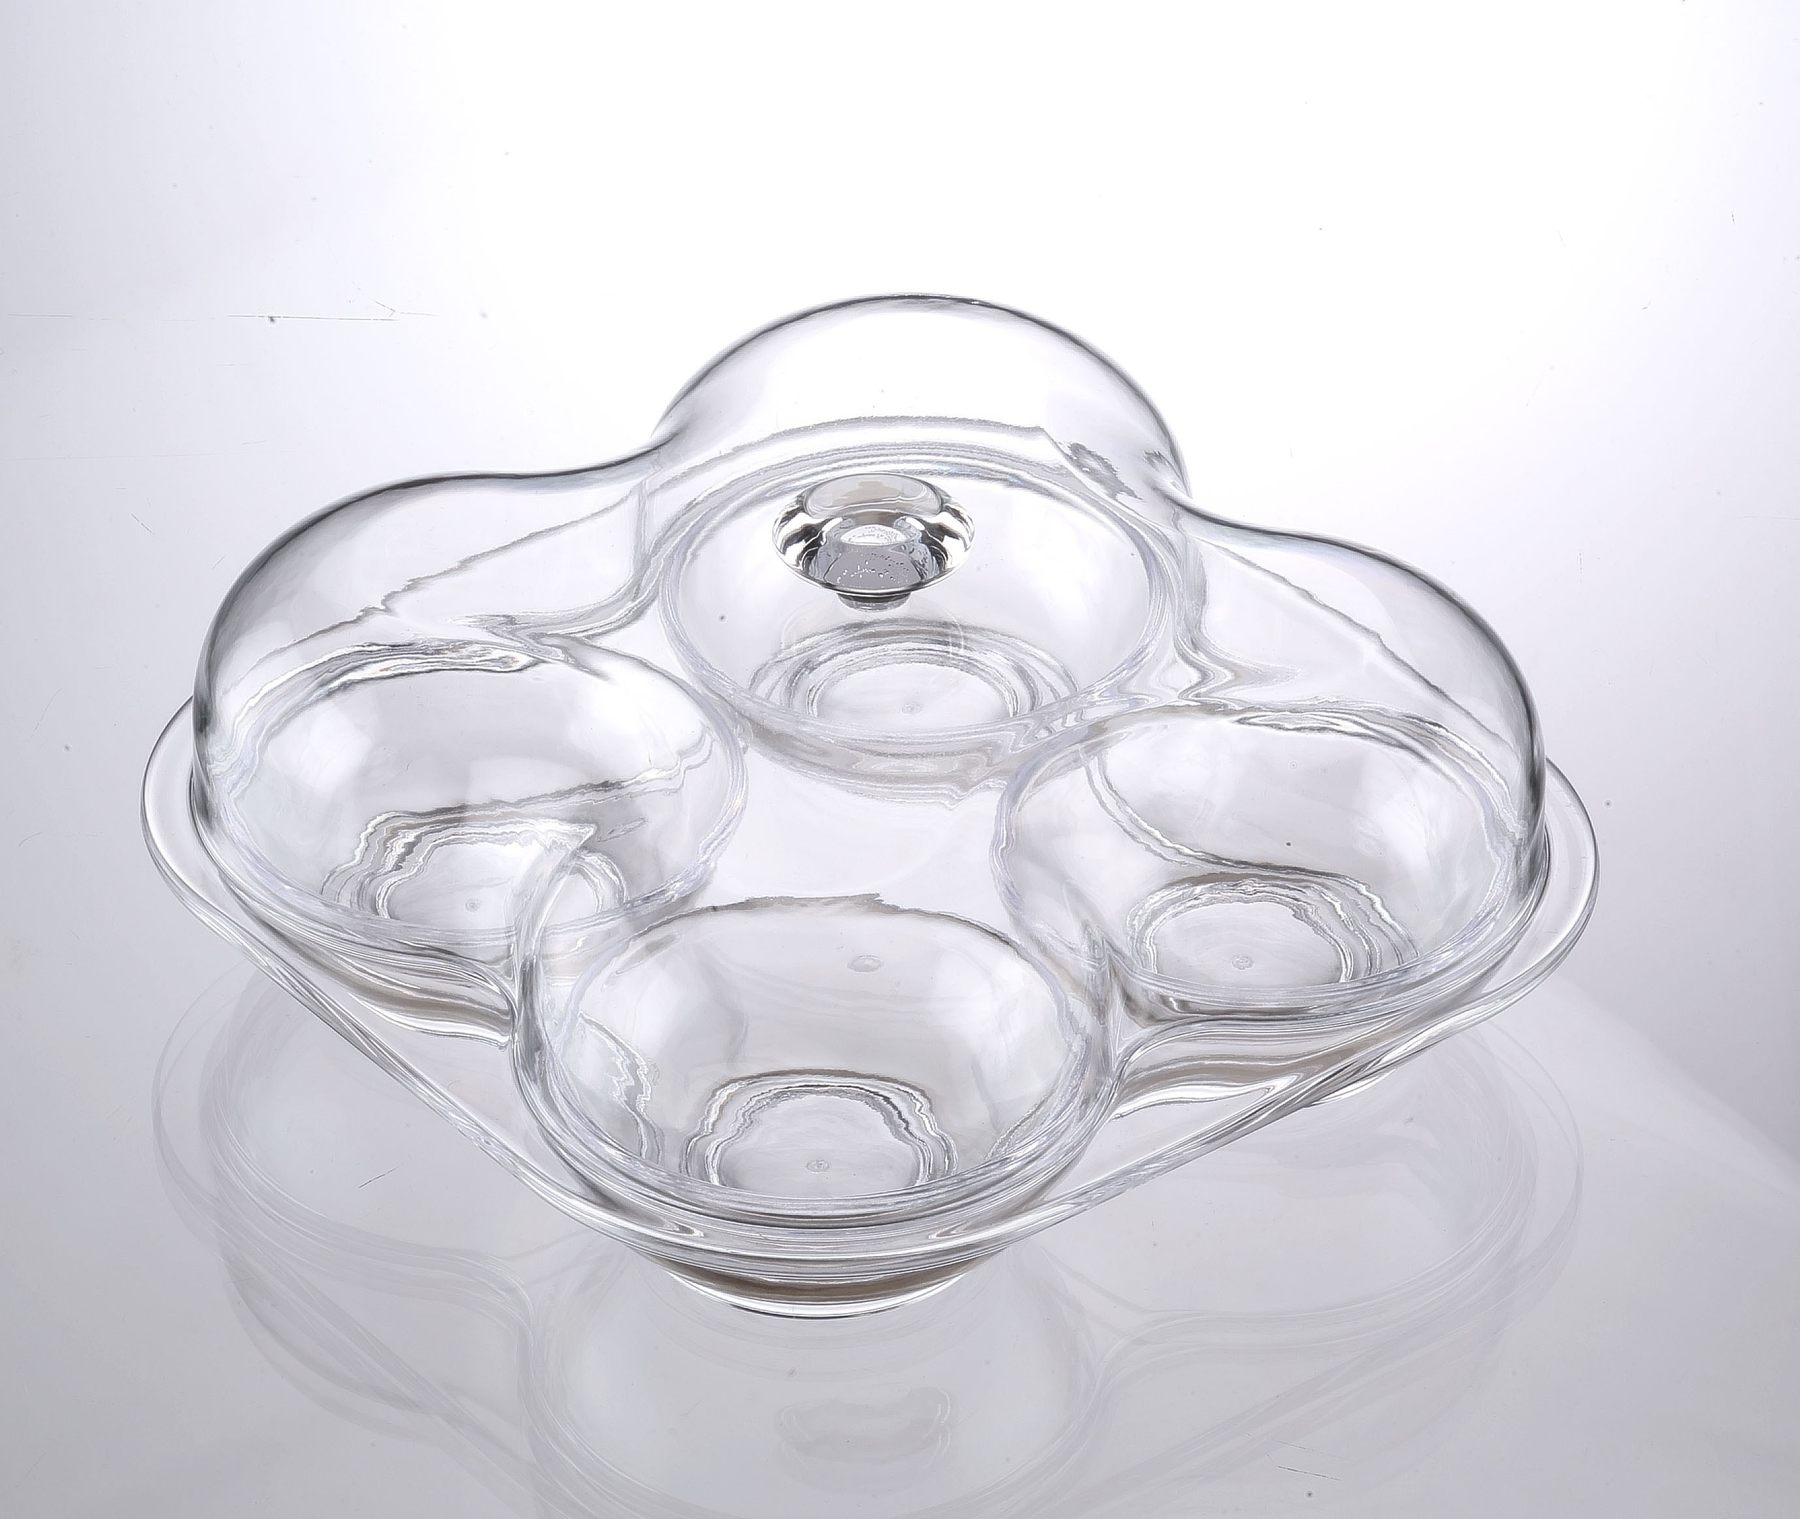 Huang Acrylic 4 Bowl Tray with Cover